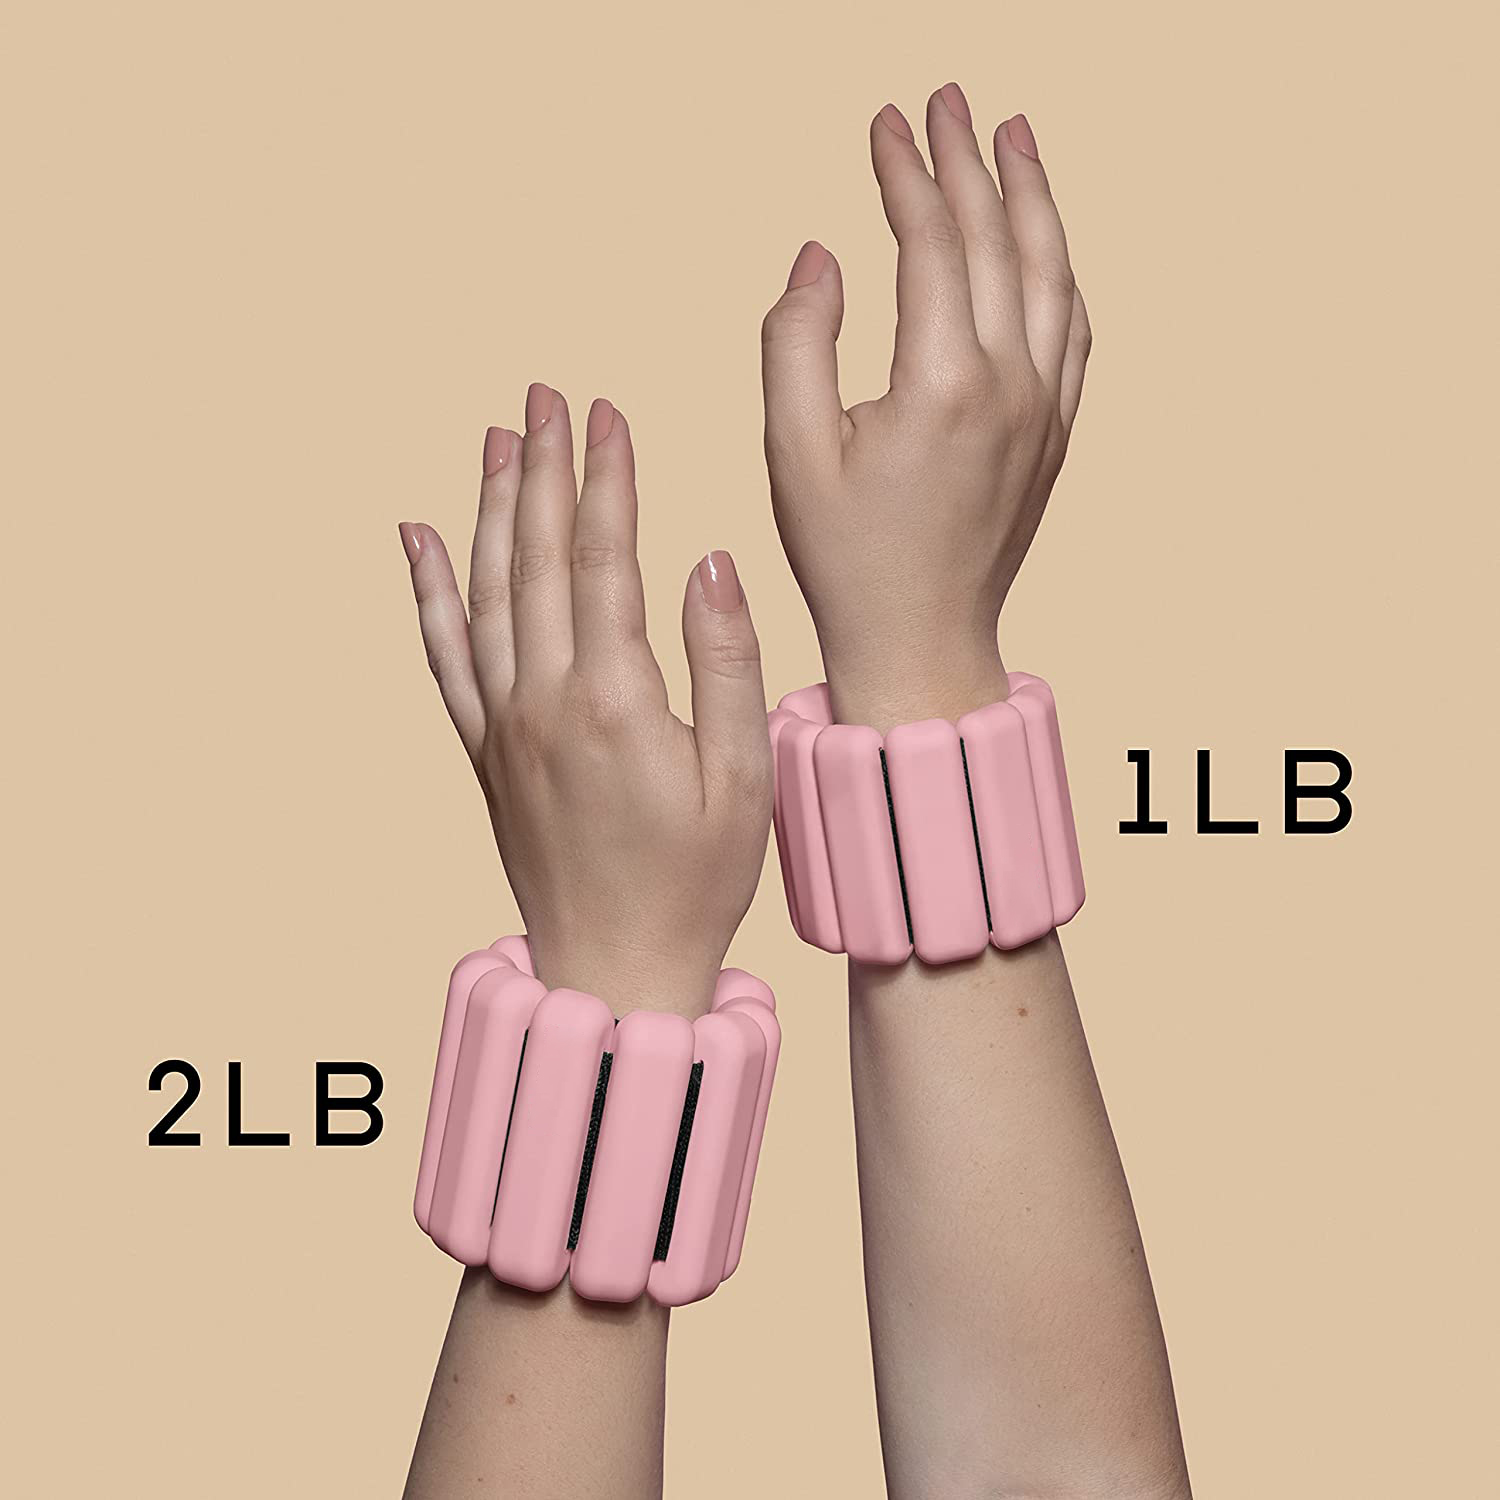 Adjustable Silicone Wearable Bracelet Weights Waterproof 2LB Bangles Ankle wrist Weights for Wrist Strength Training